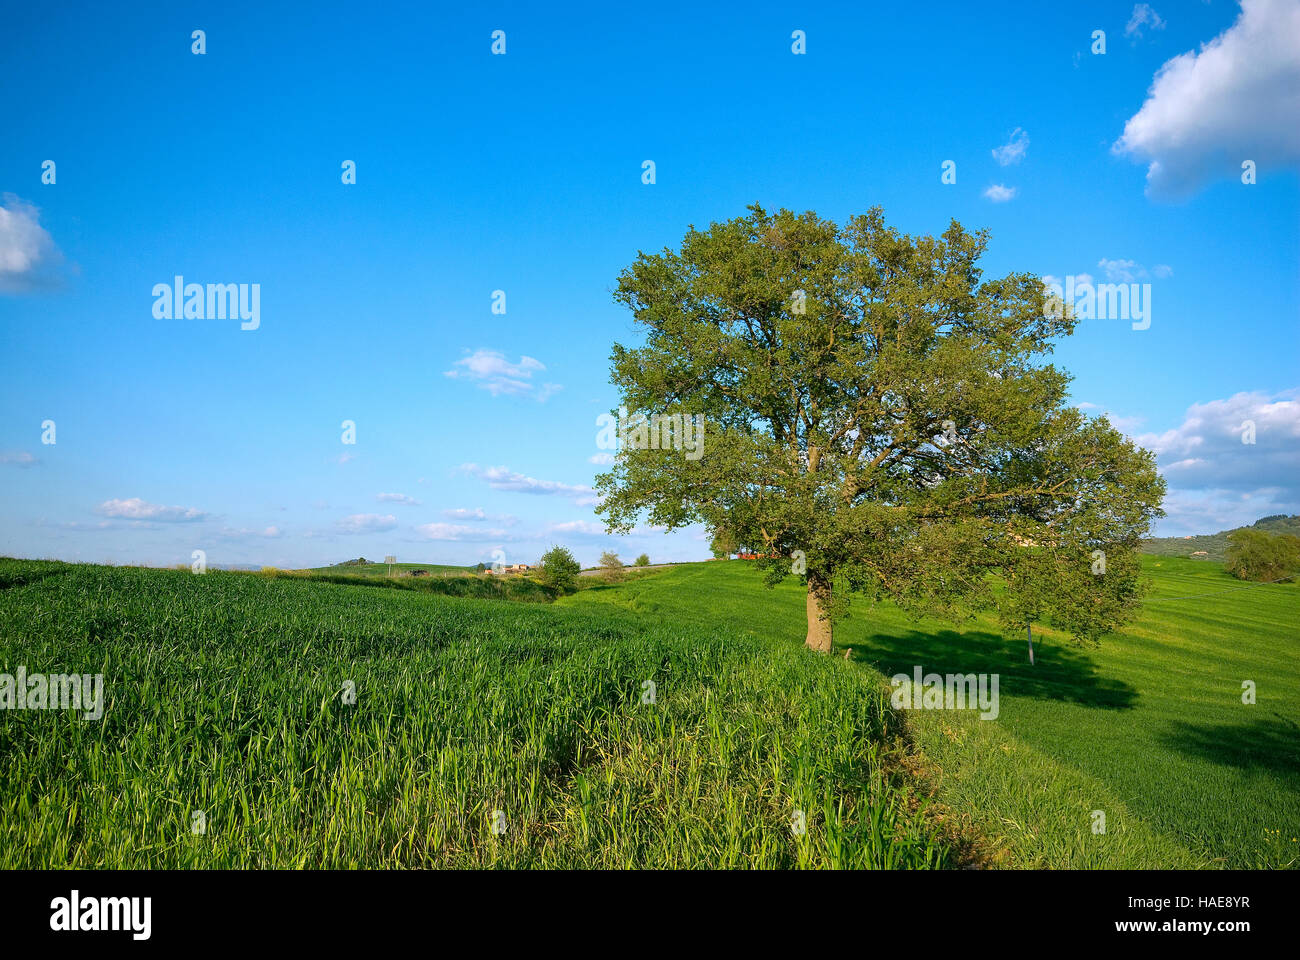 Lonely downy oak (Quercus pubescens) in a field, Umbia, Italy Stock Photo